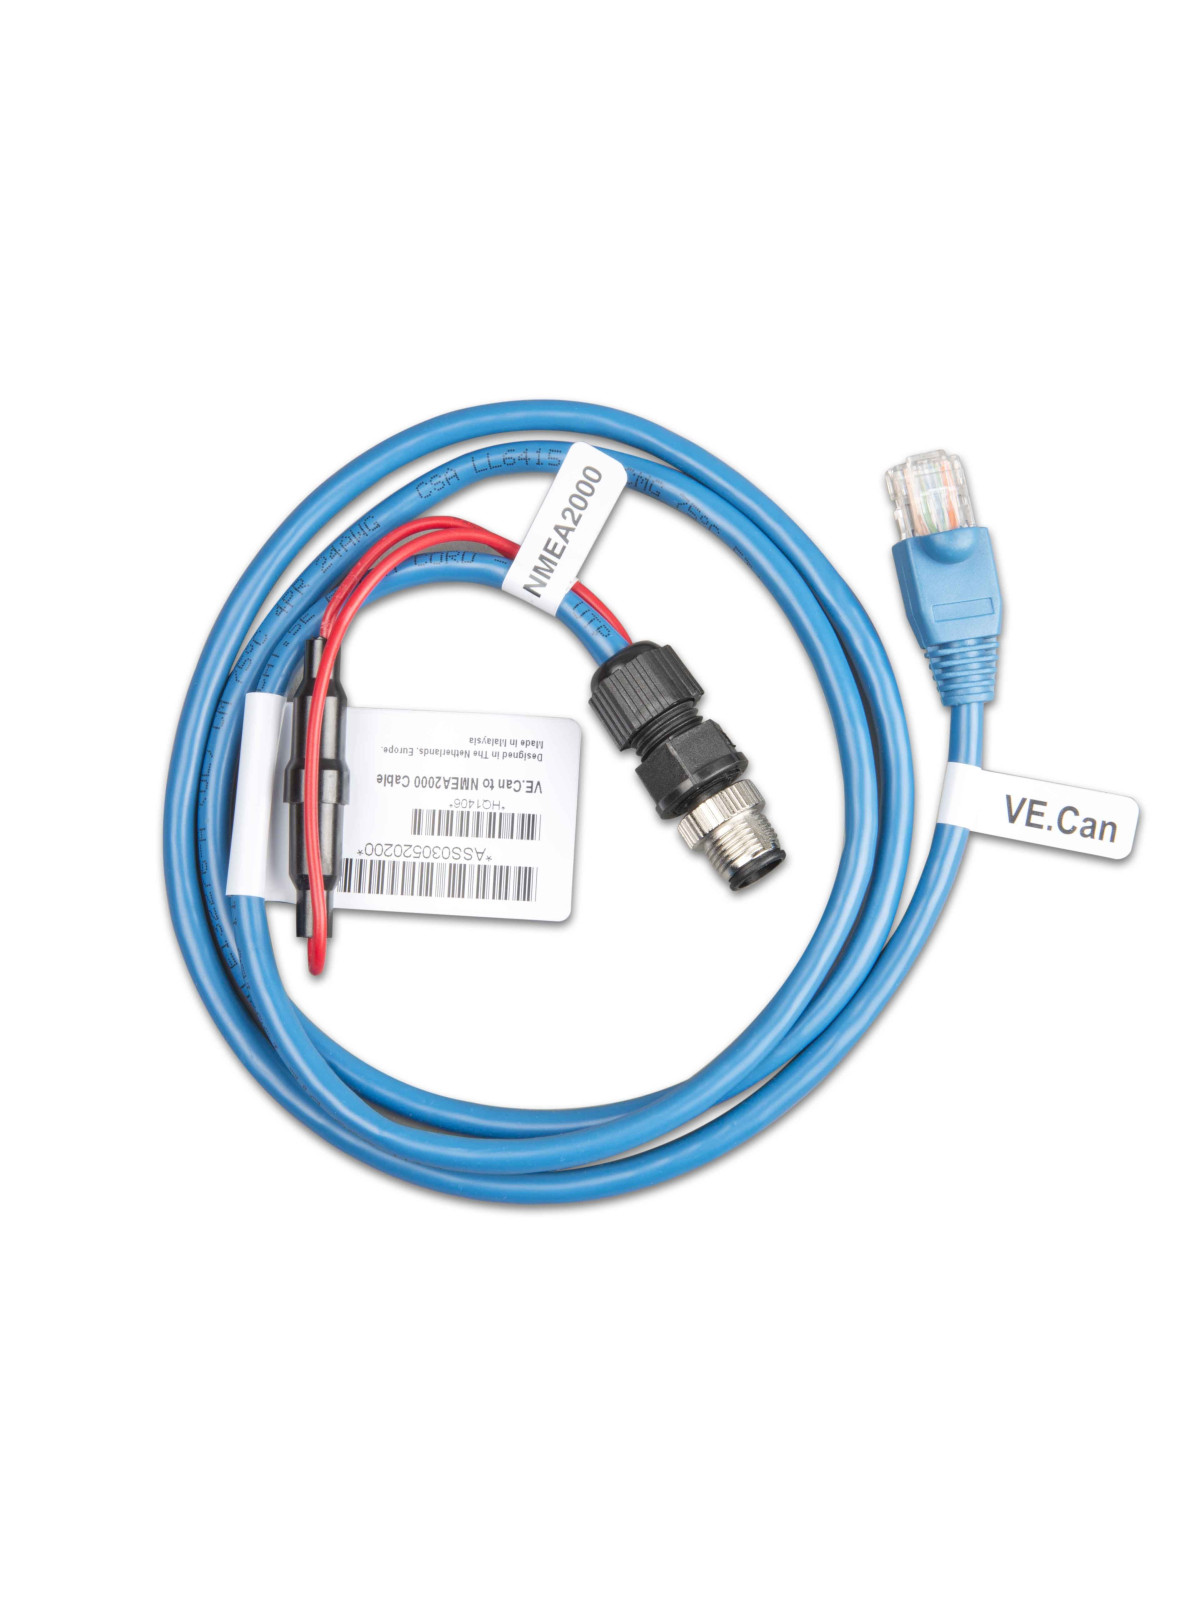 Cable Victron VE.Can a NMEA2000 micro-C macho